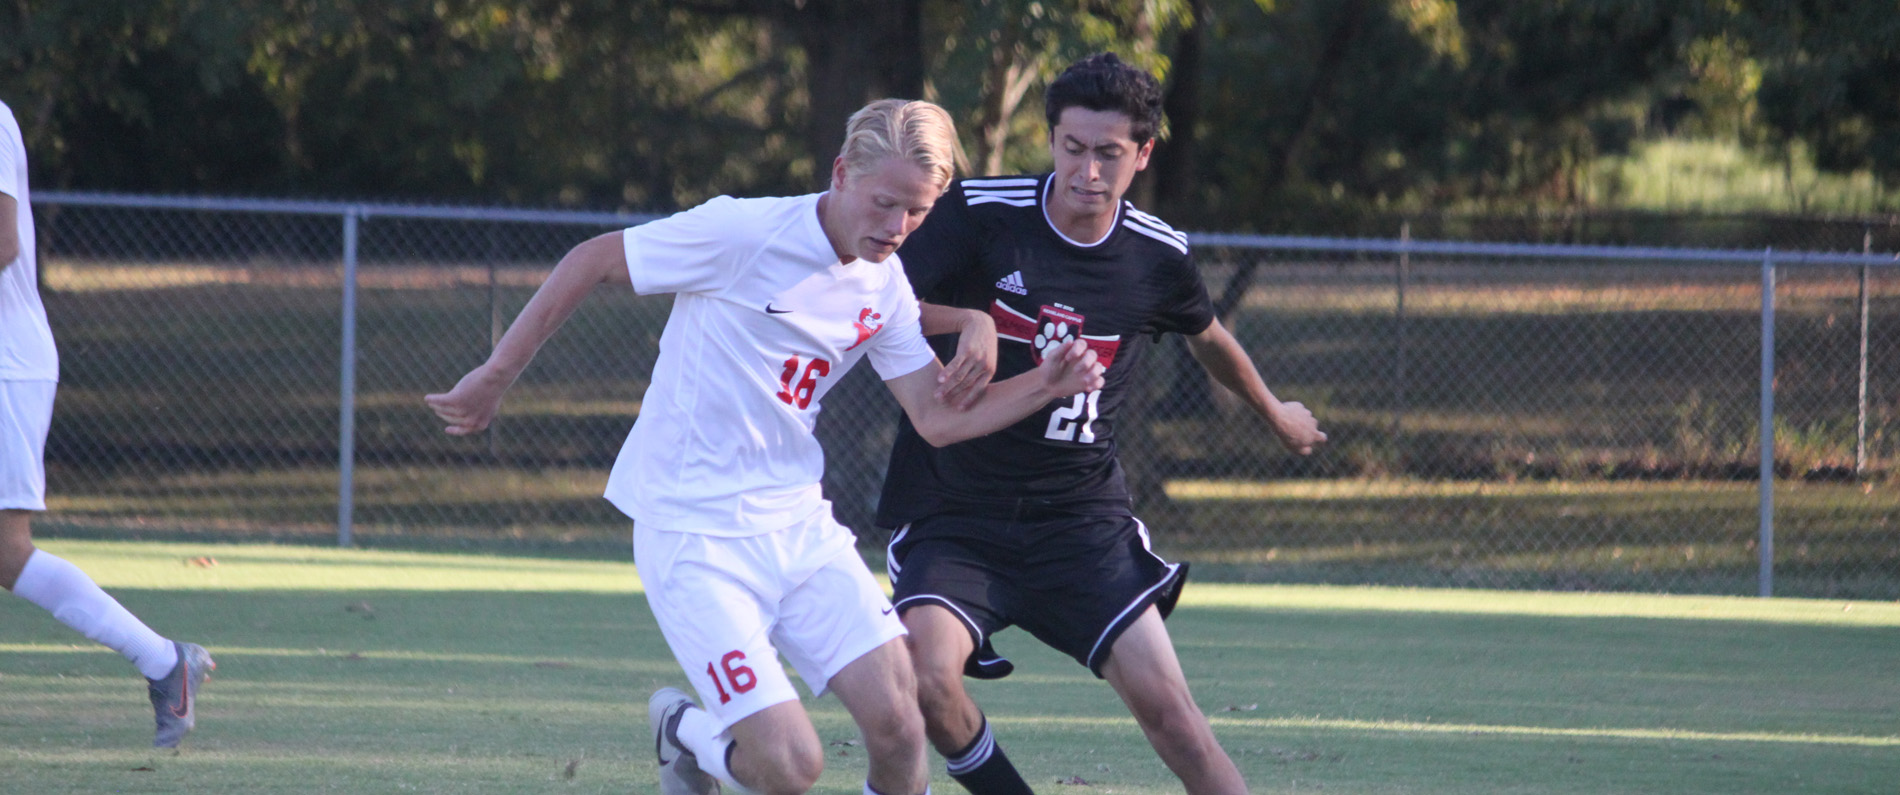 Bulldogs pick up 4-1 win over Oxford-Emory